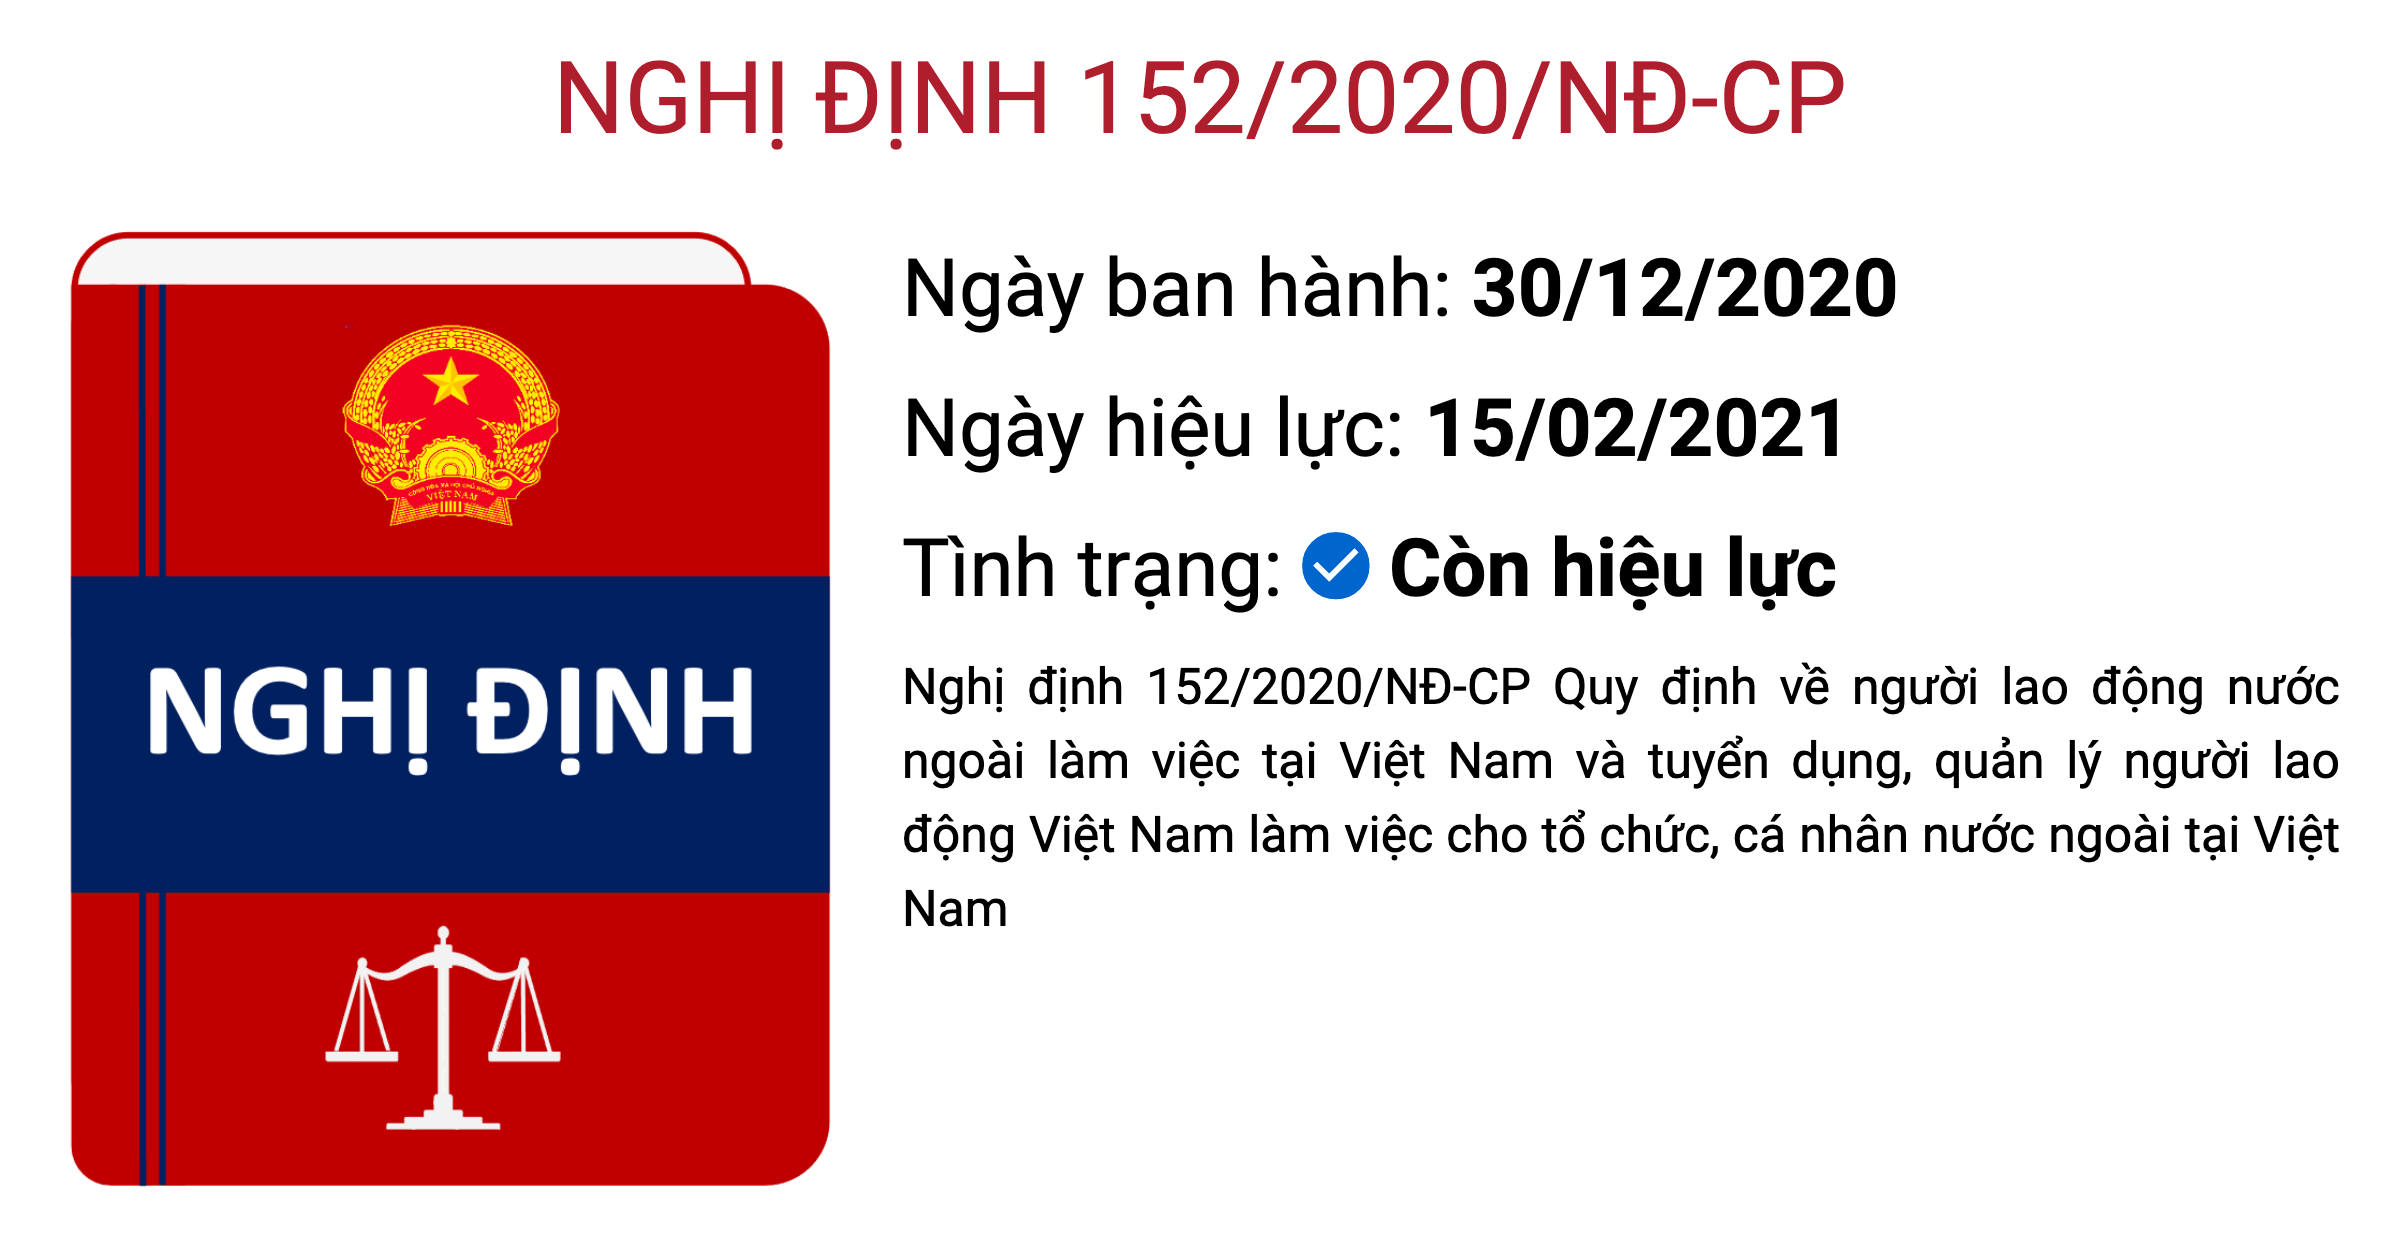 nghi-dinh-152-2020-nd-cp.png